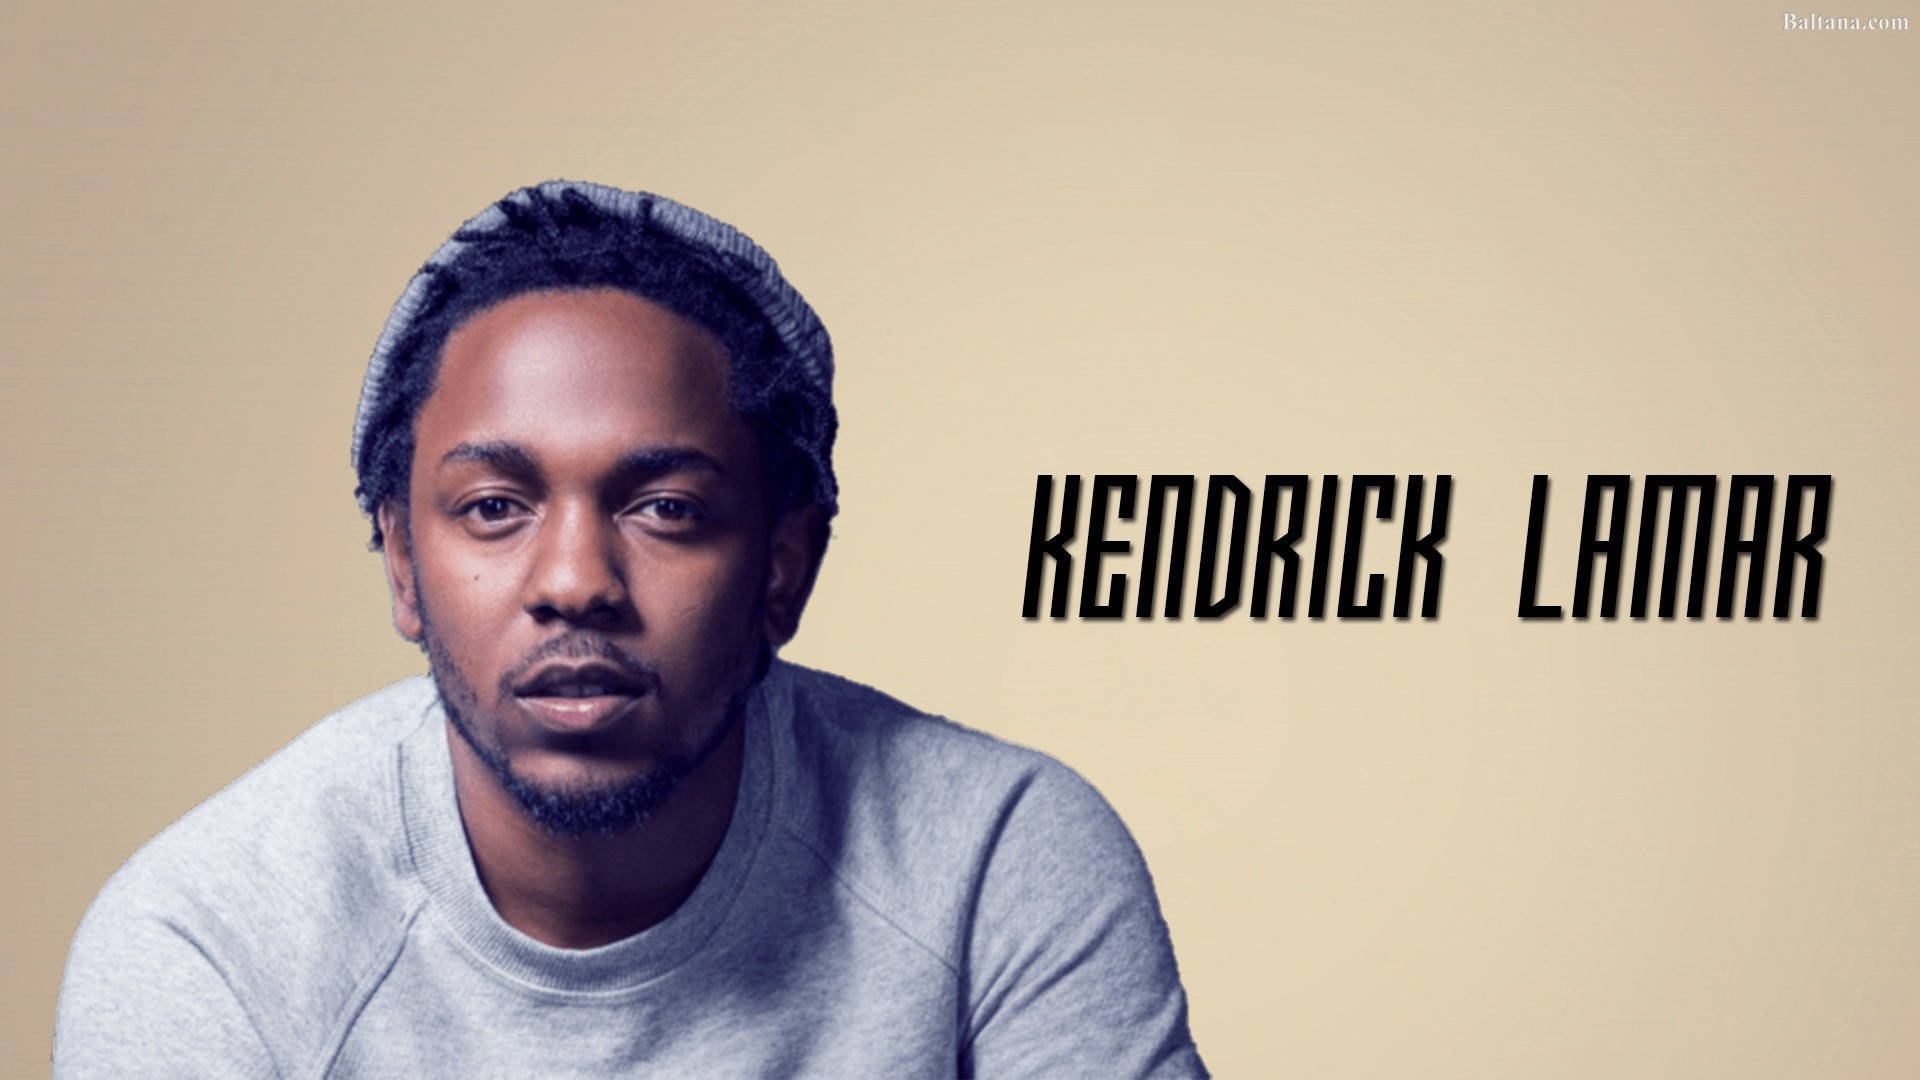 Kendrick Lamar In Brown Cover Background